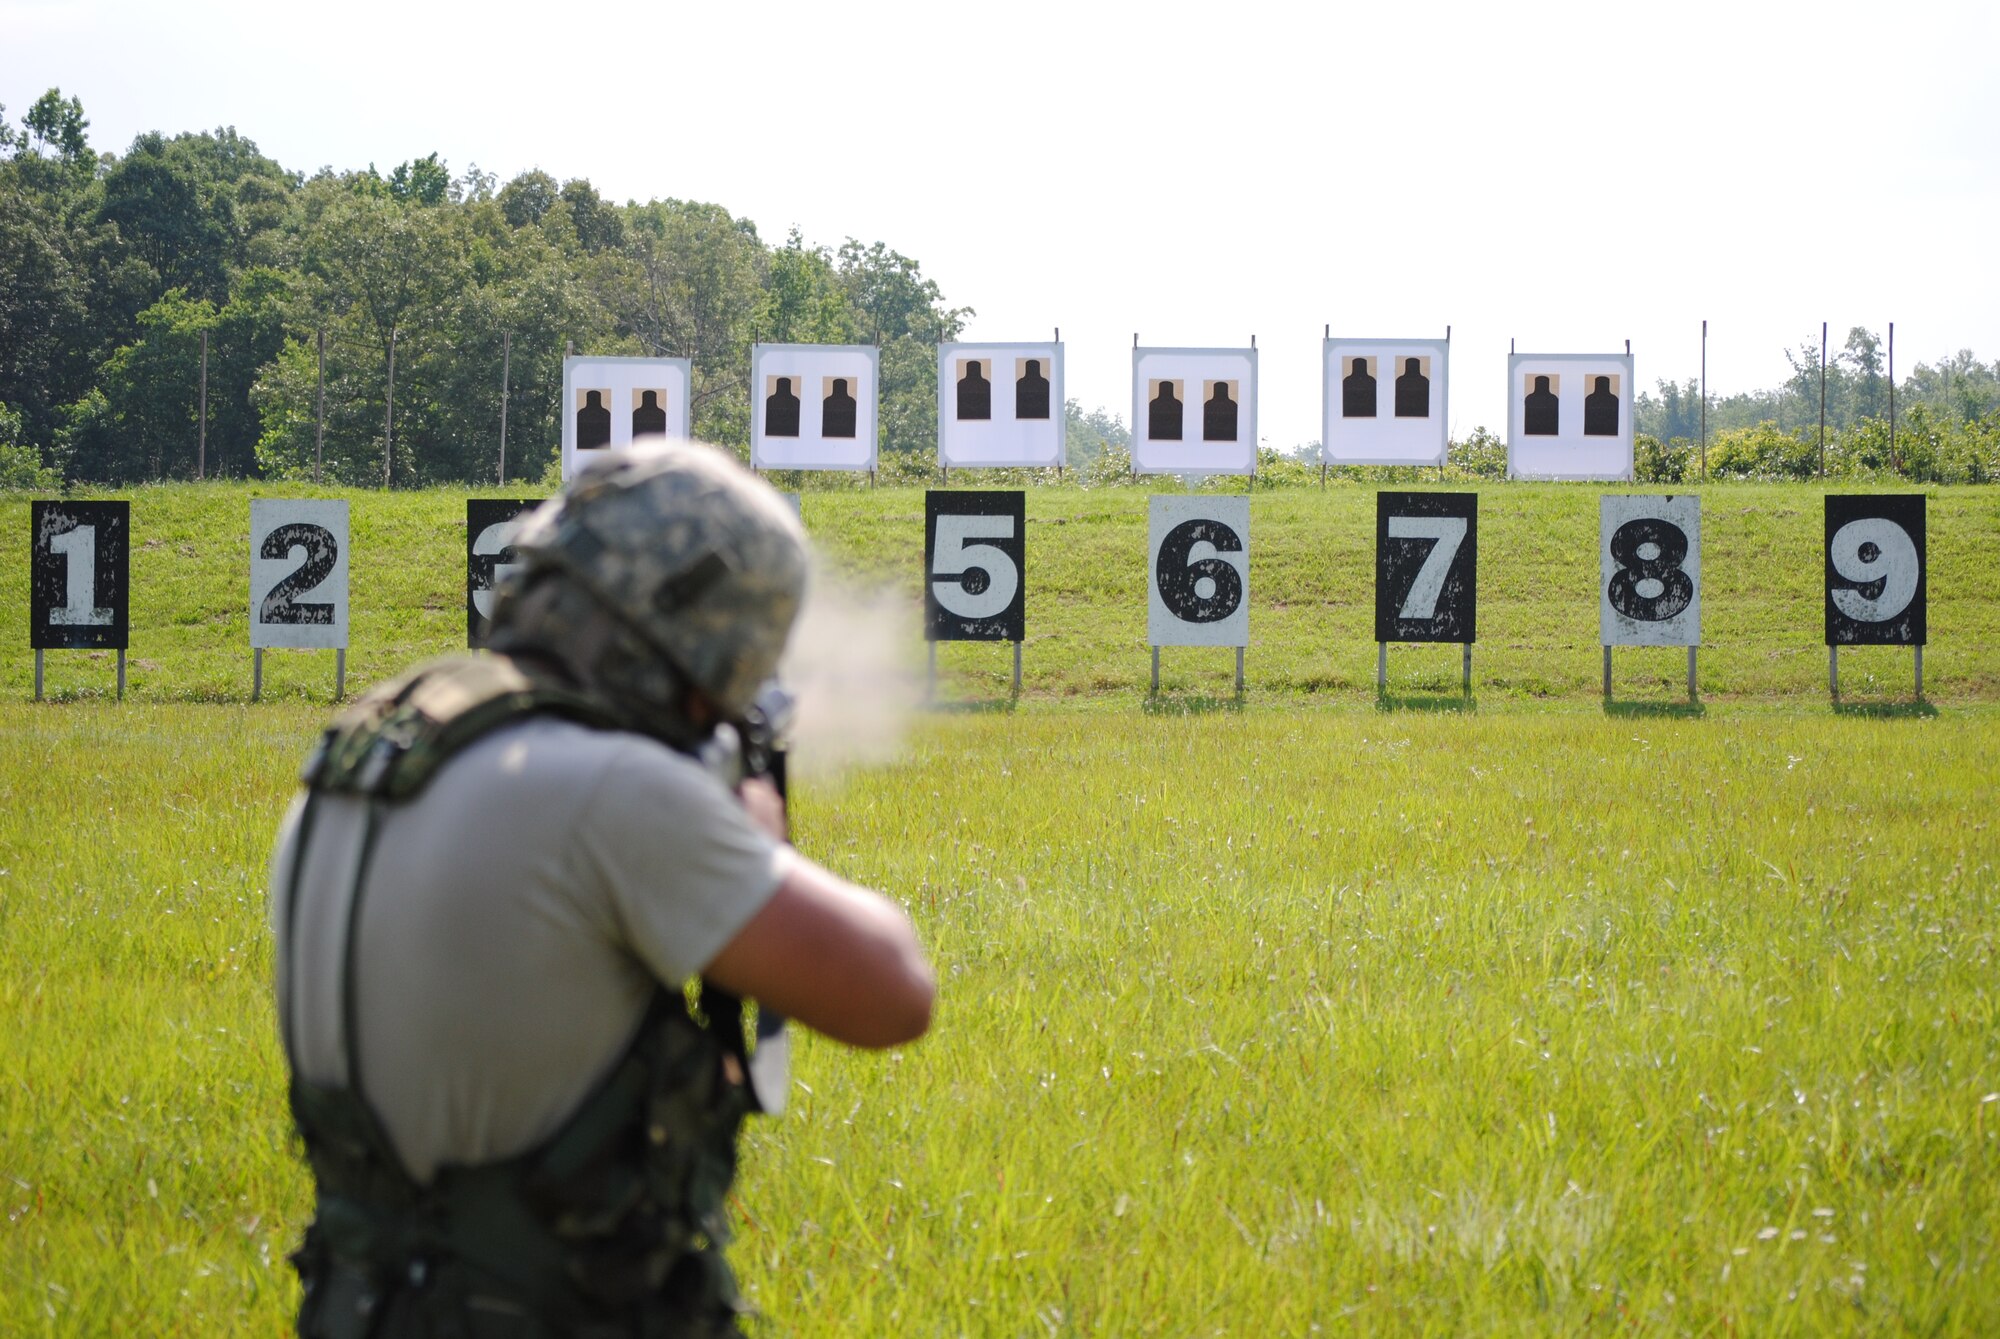 A competitor in the 2010 Tennessee National Guard shooting competition takes a standing firing position and fires on his target.